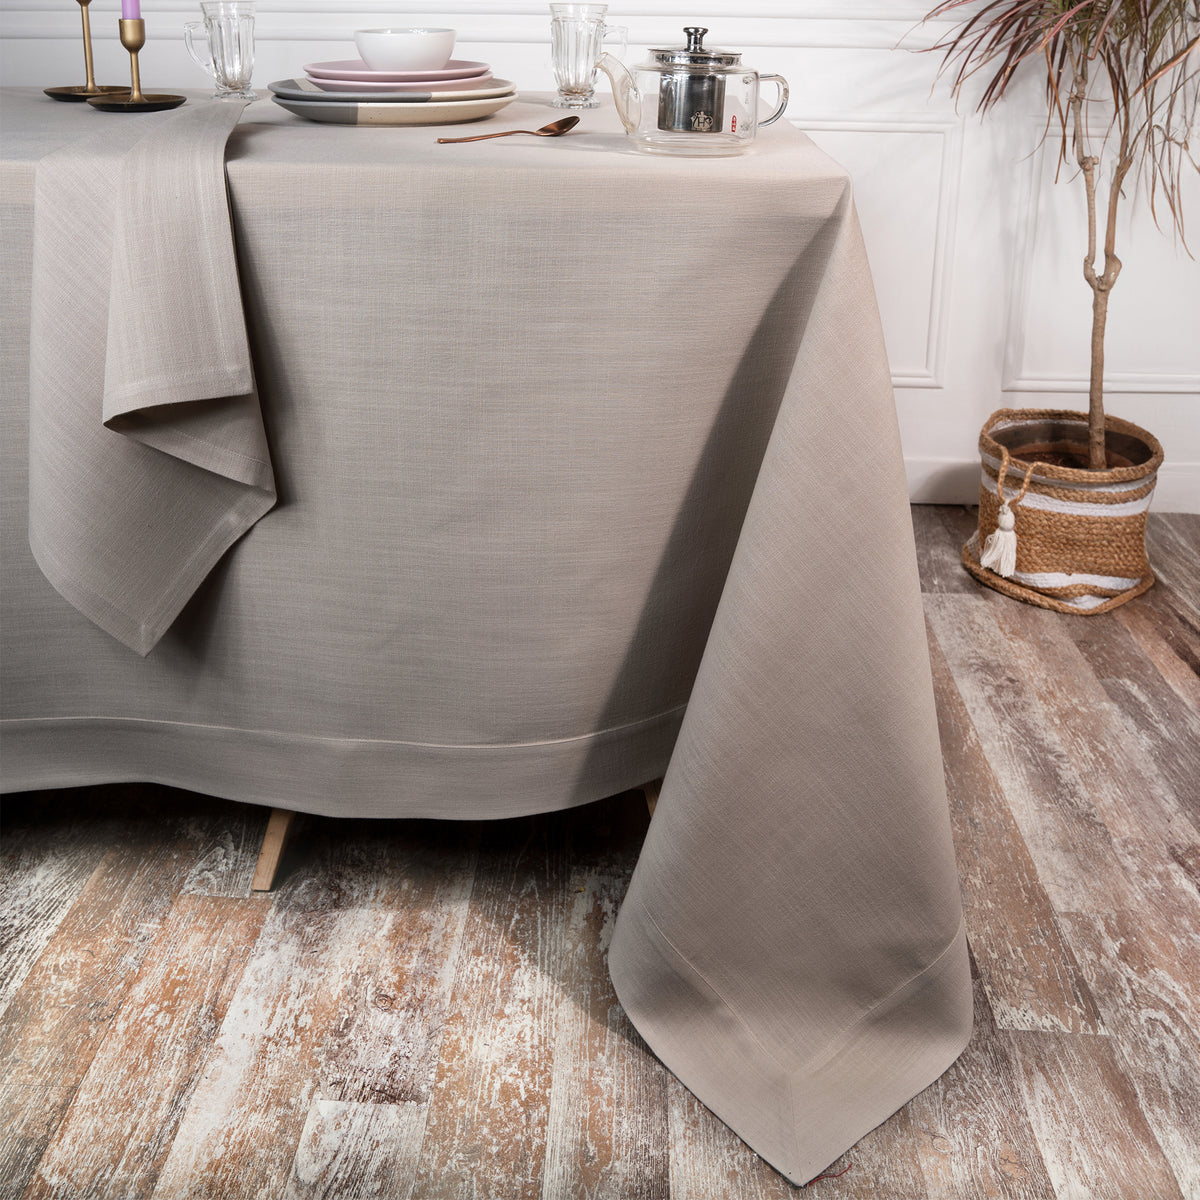 Natural Faux Linen Tablecloth - Mitered Corner